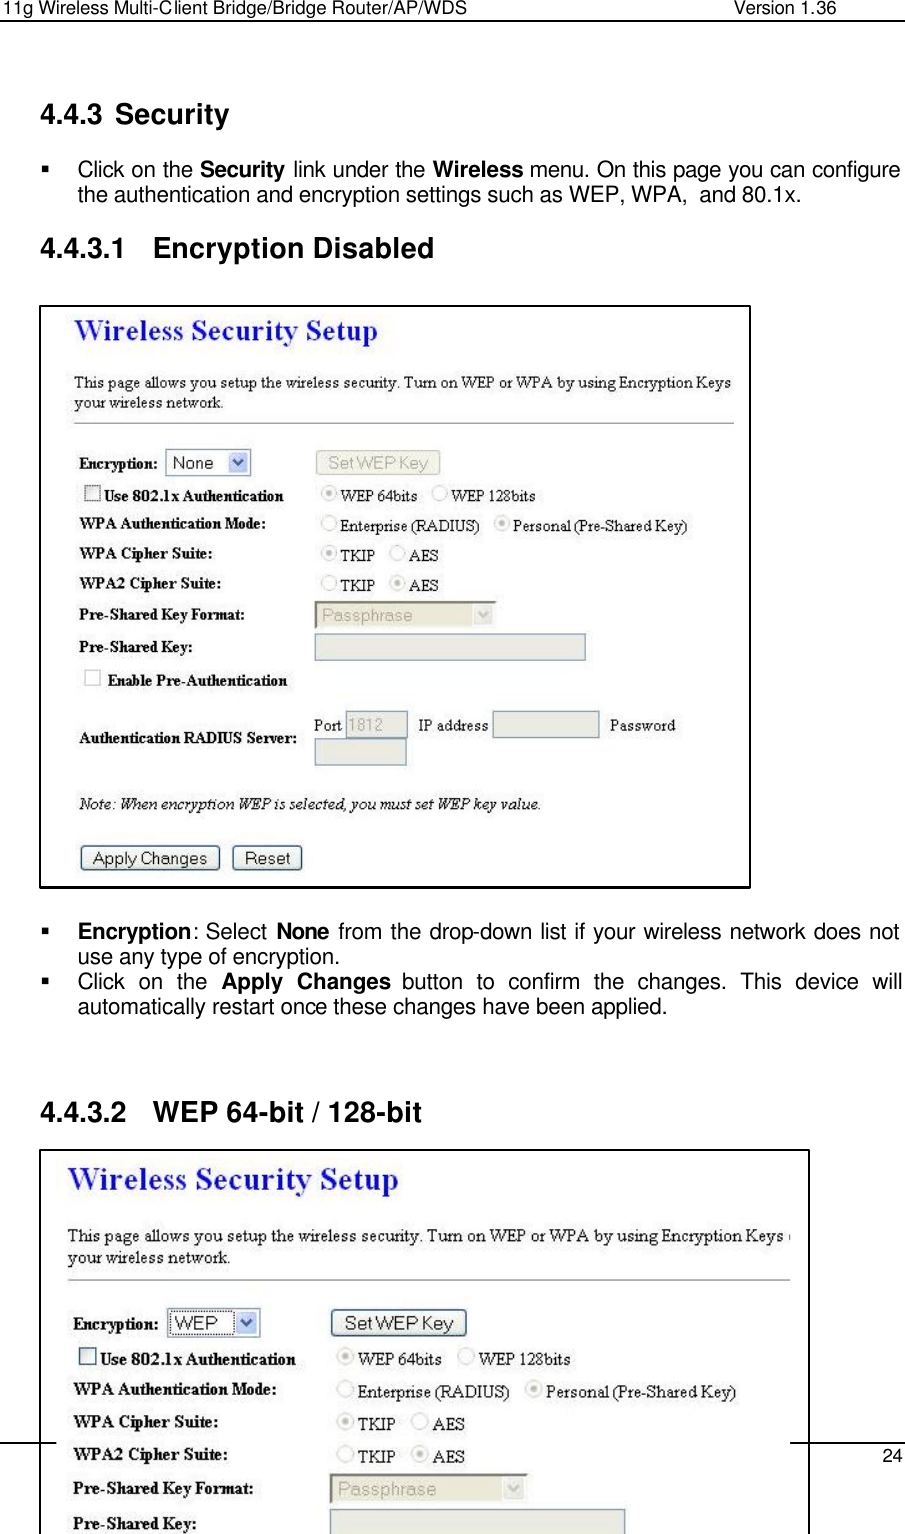 11g Wireless Multi-Client Bridge/Bridge Router/AP/WDS                                                   Version 1.36    24   4.4.3 Security  § Click on the Security link under the Wireless menu. On this page you can configure the authentication and encryption settings such as WEP, WPA,  and 80.1x.   4.4.3.1 Encryption Disabled                          § Encryption: Select None from the drop-down list if your wireless network does not use any type of encryption.  § Click on the Apply Changes button to confirm the changes. This device will automatically restart once these changes have been applied.     4.4.3.2 WEP 64-bit / 128-bit           